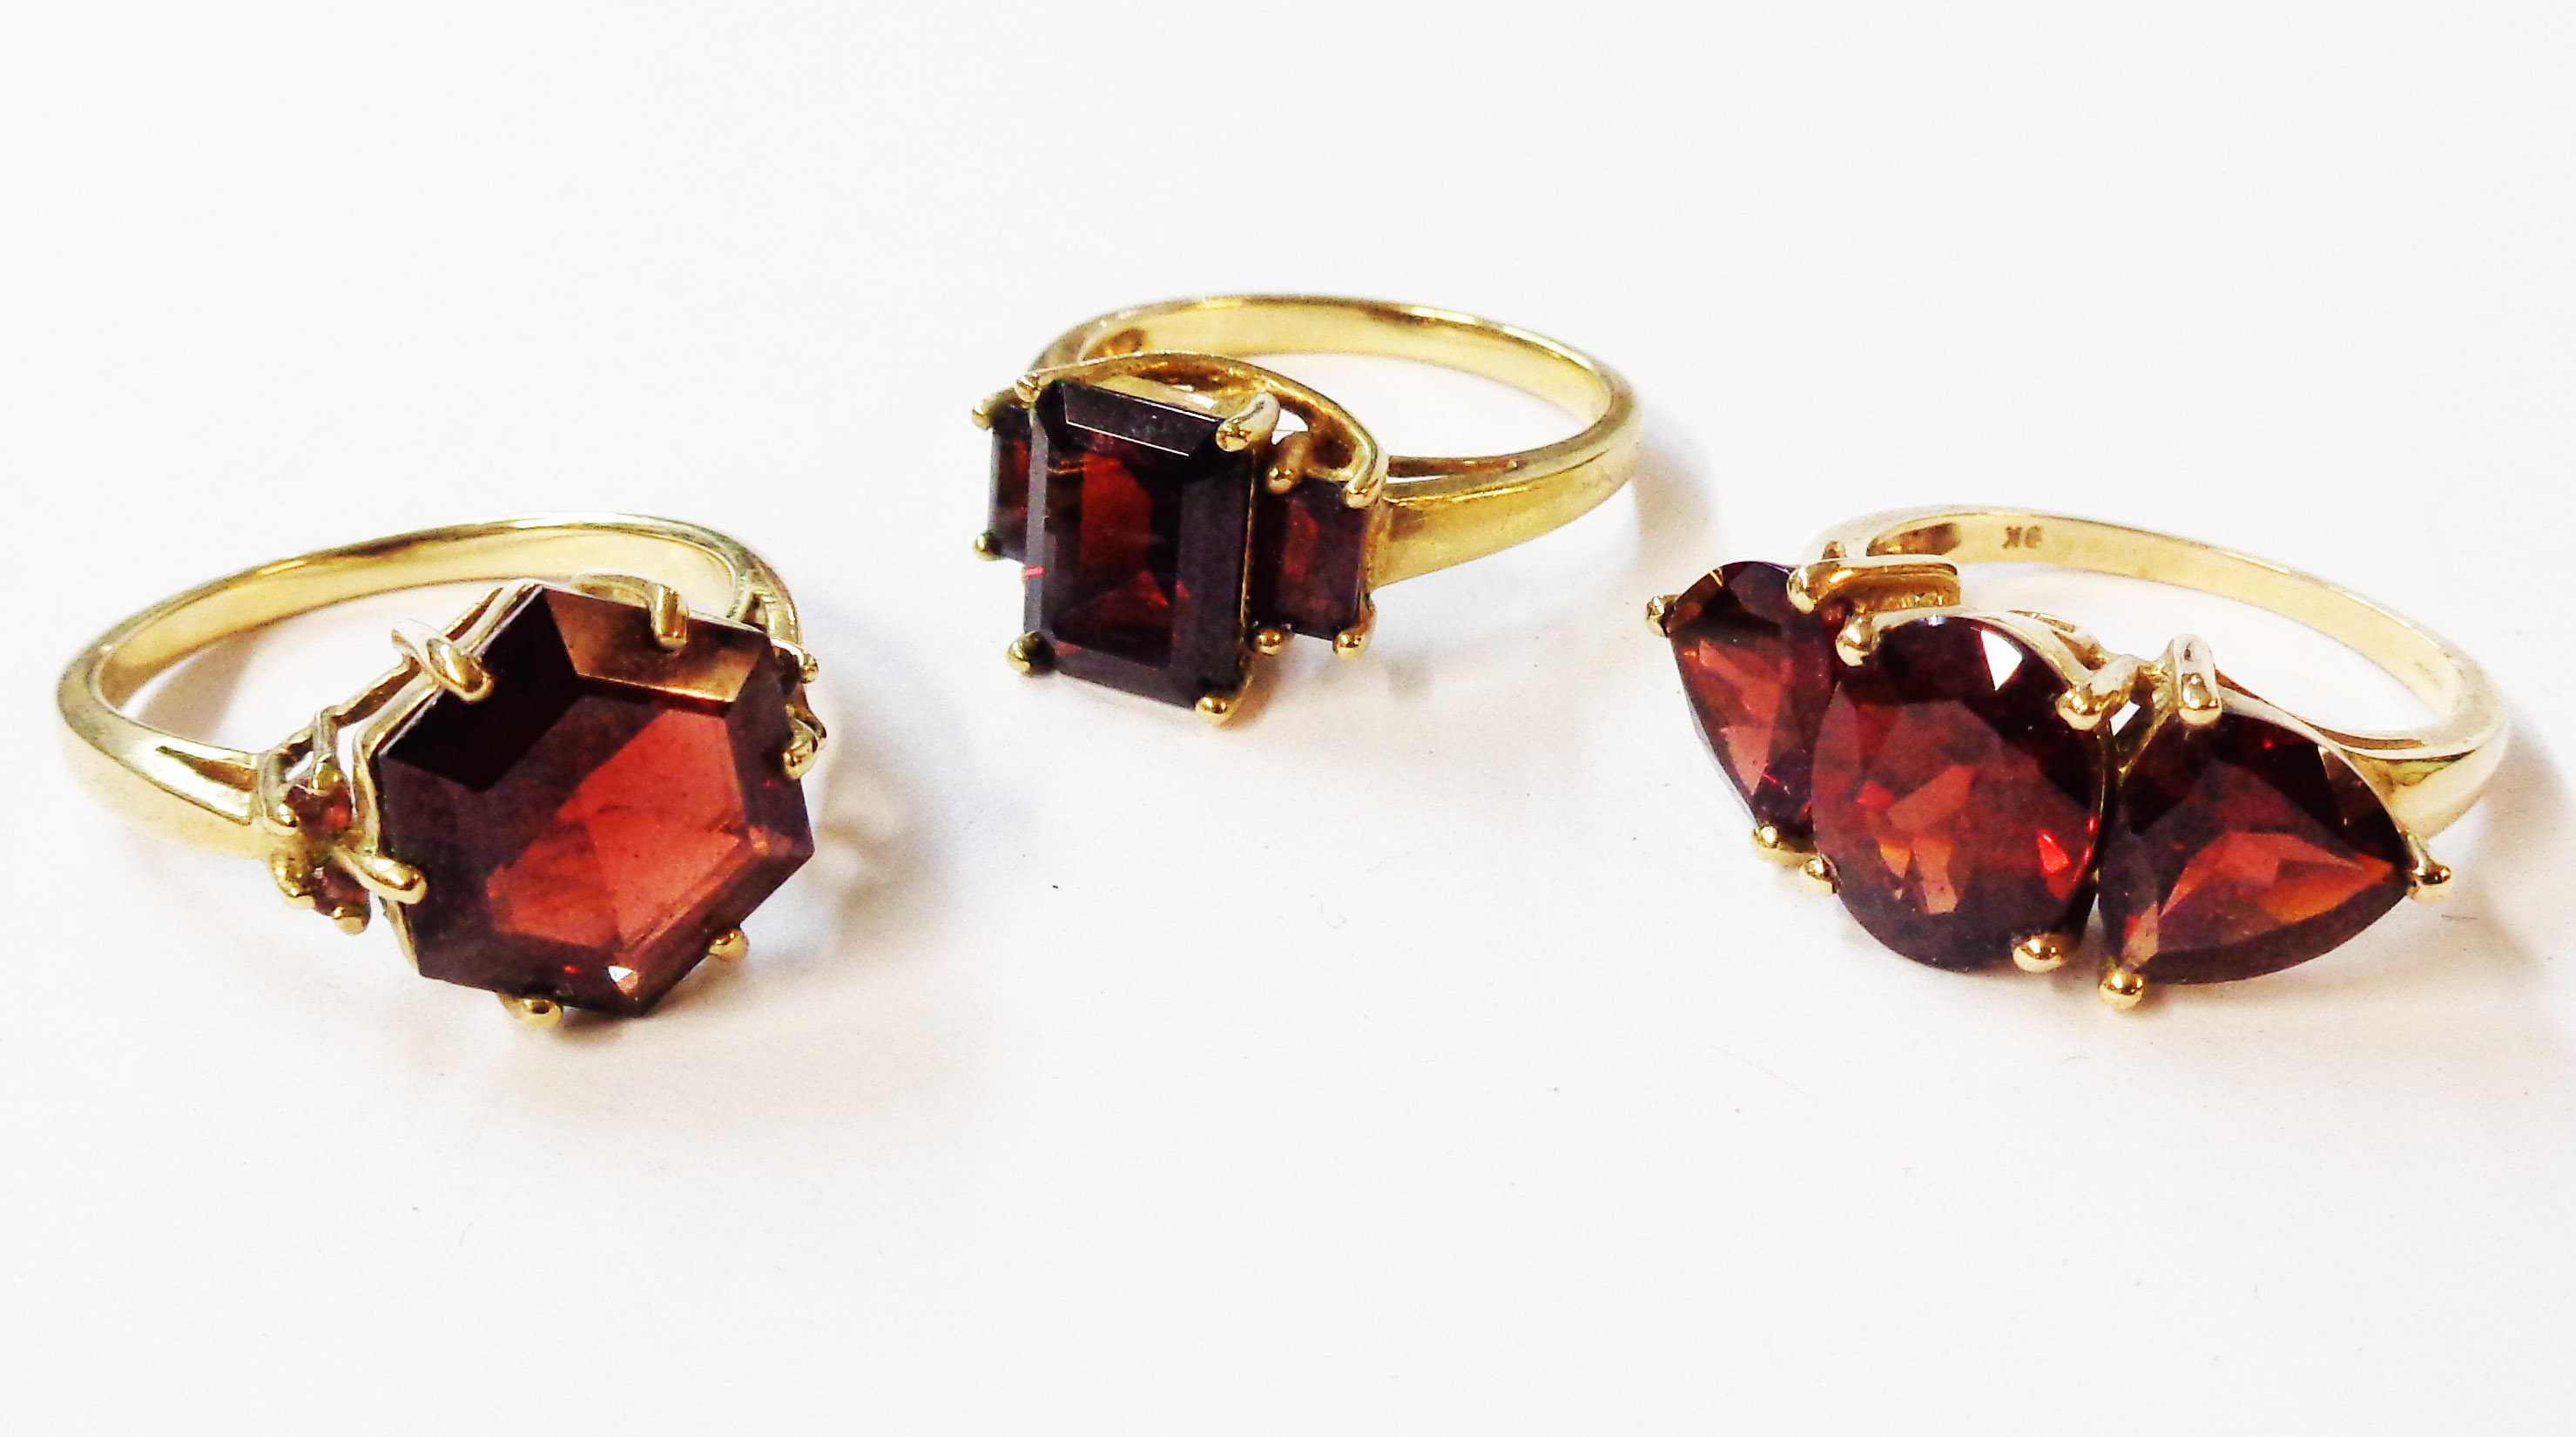 Three 375 (9ct.) gold rings, all set with various garnets comprising a solitairre, three stone and